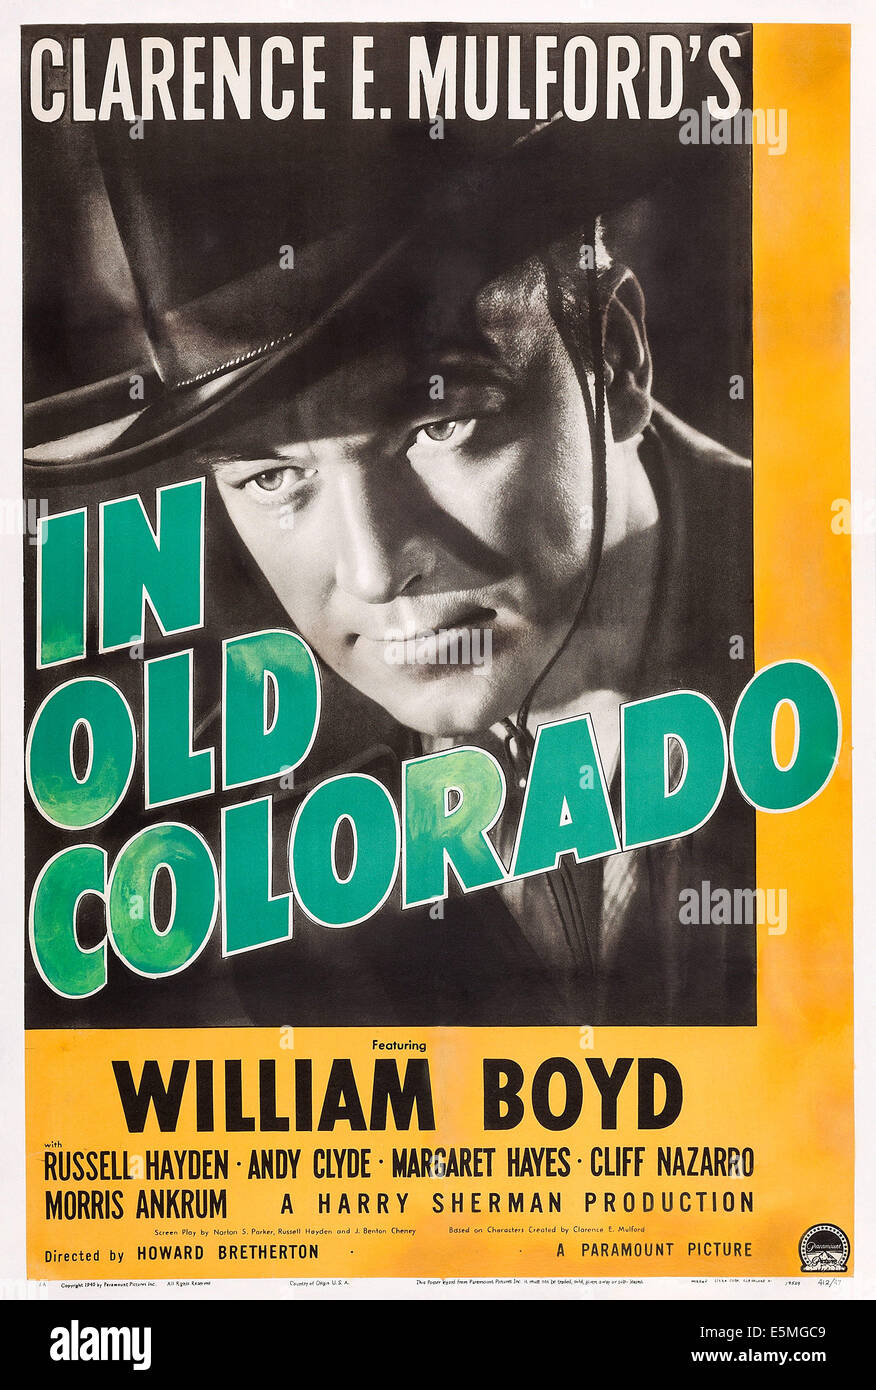 IN OLD COLORADO, William Boyd on poster art, 1941. Stock Photo